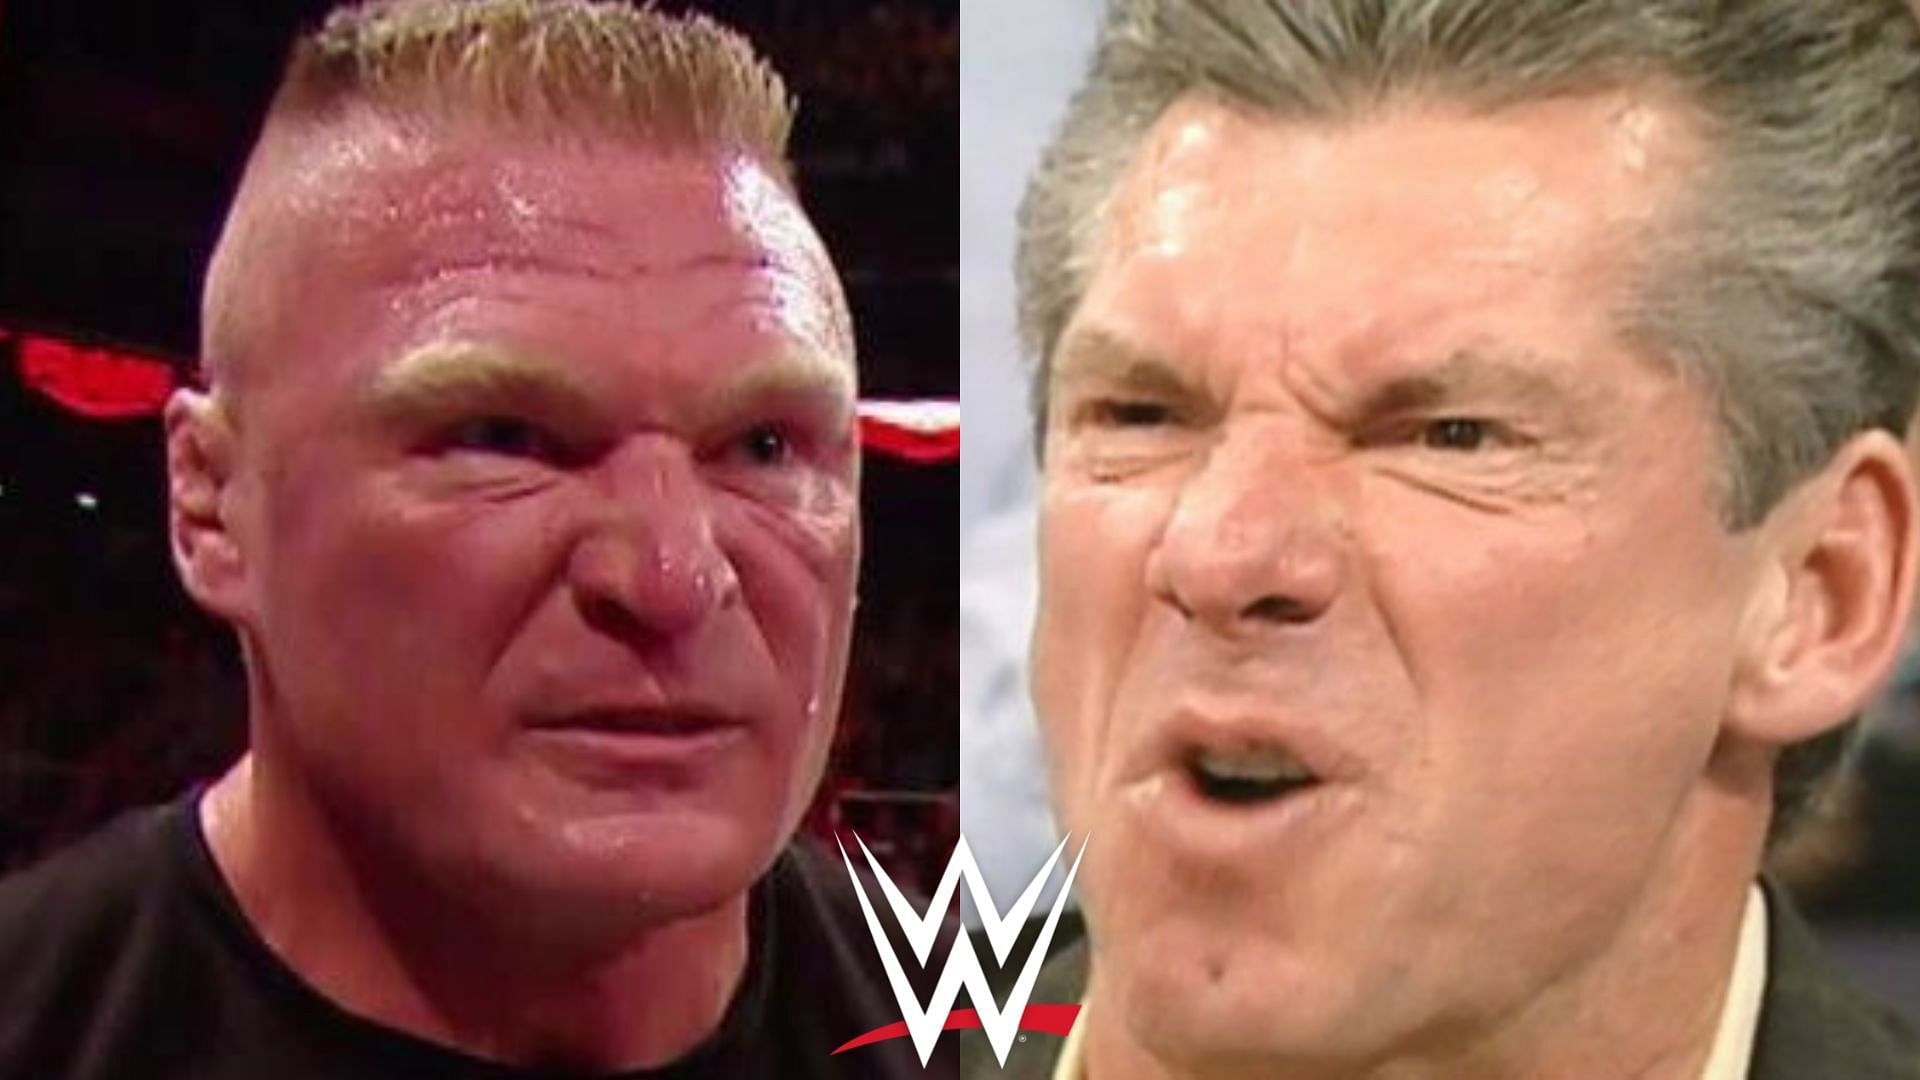 Was Vince McMahon to blame for Brock Lesnar